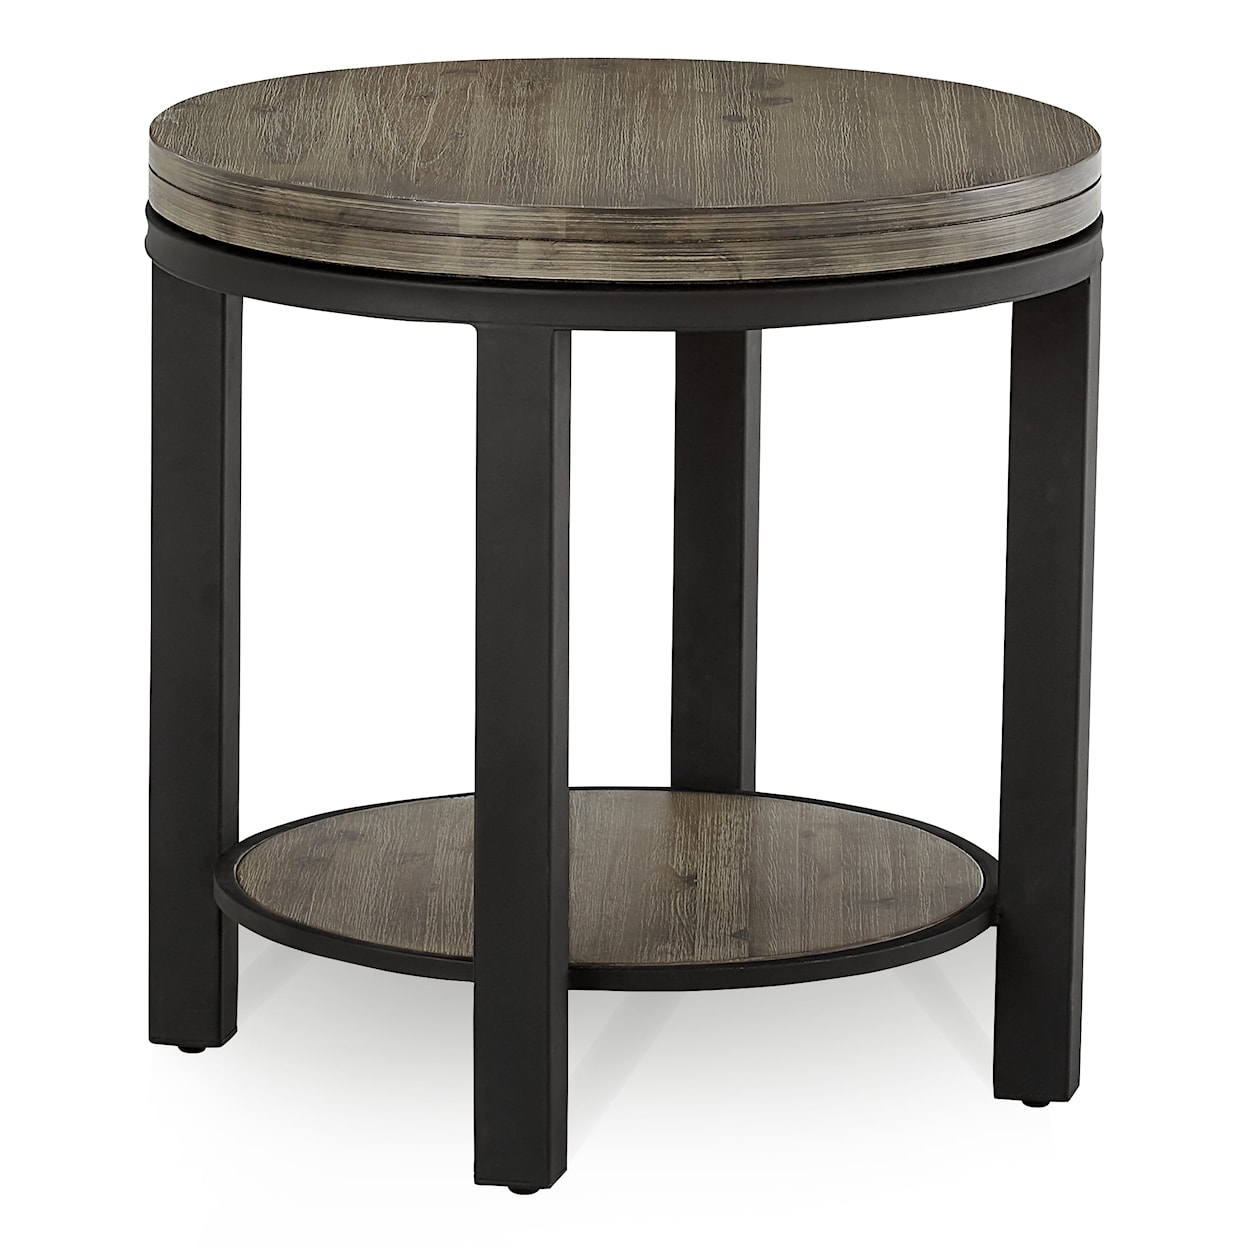 Modus International Canyon Washed Grey Solid Wood and Metal Round End Table